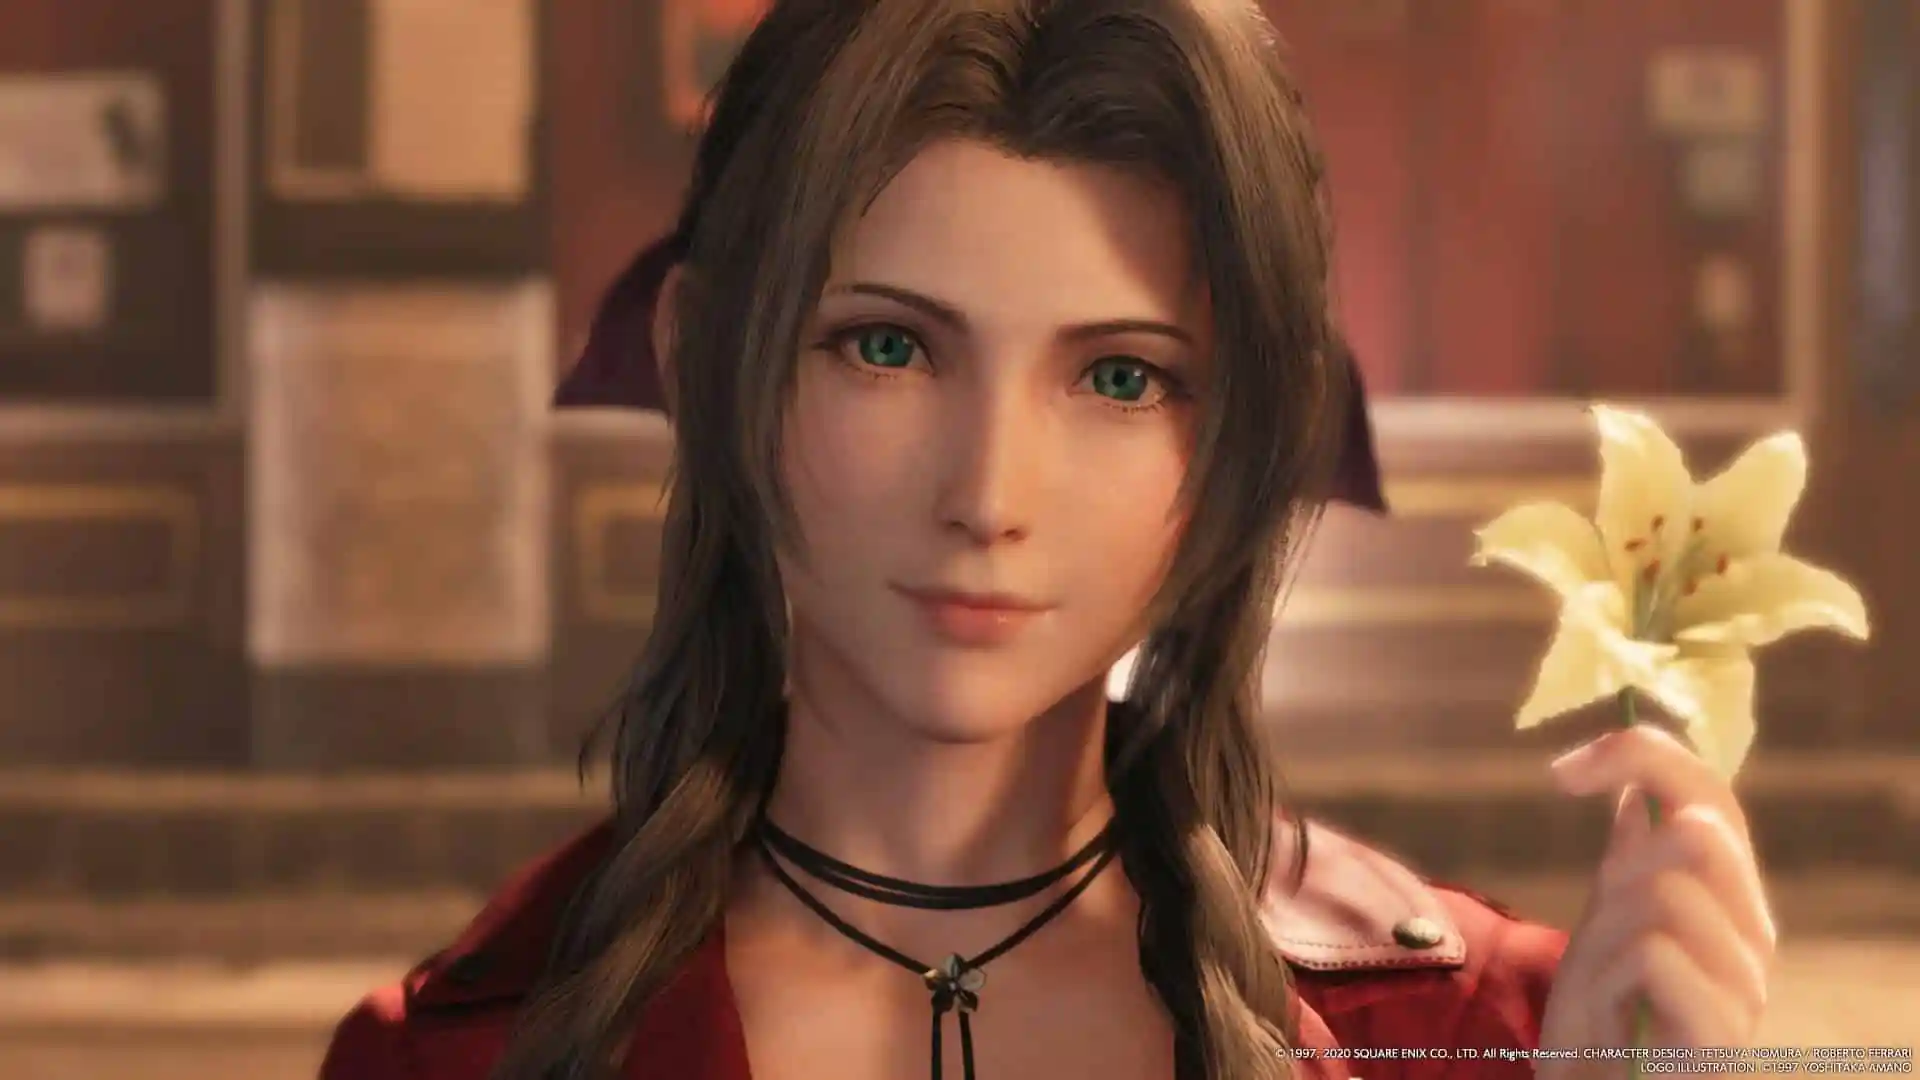 Final Fantasy VII Aeris Gainsborough legacy death Aerith PlayStation 1 hero honoring her memory, fighting for the world